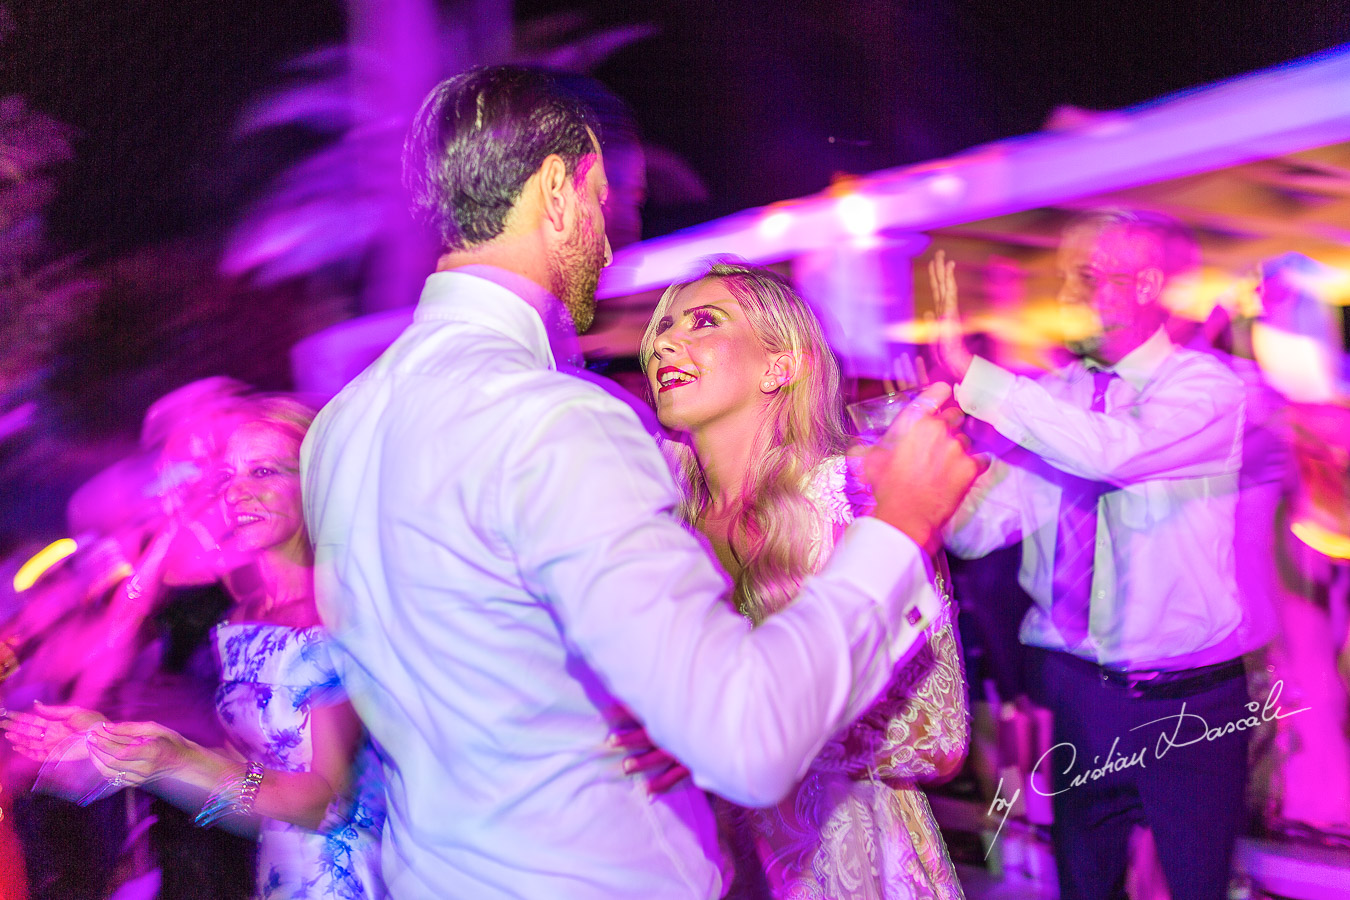 Moments captured during an elegant and romantic wedding at Elias Beach Hotel by Cristian Dascalu.